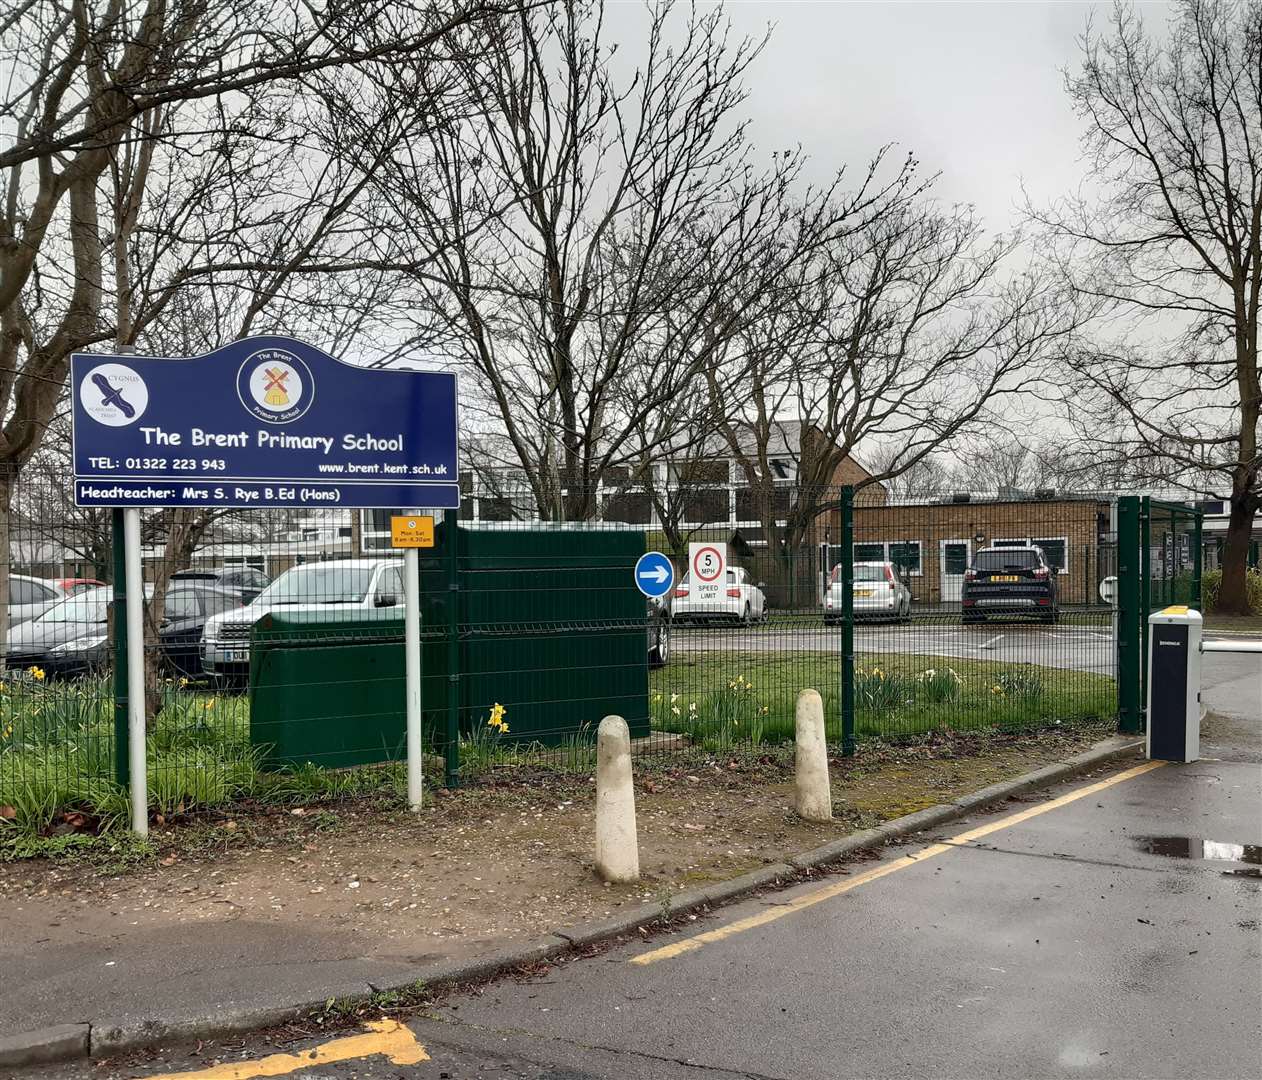 The Brent Primary School is one of the schools reported to be affected by the ongoing pay row